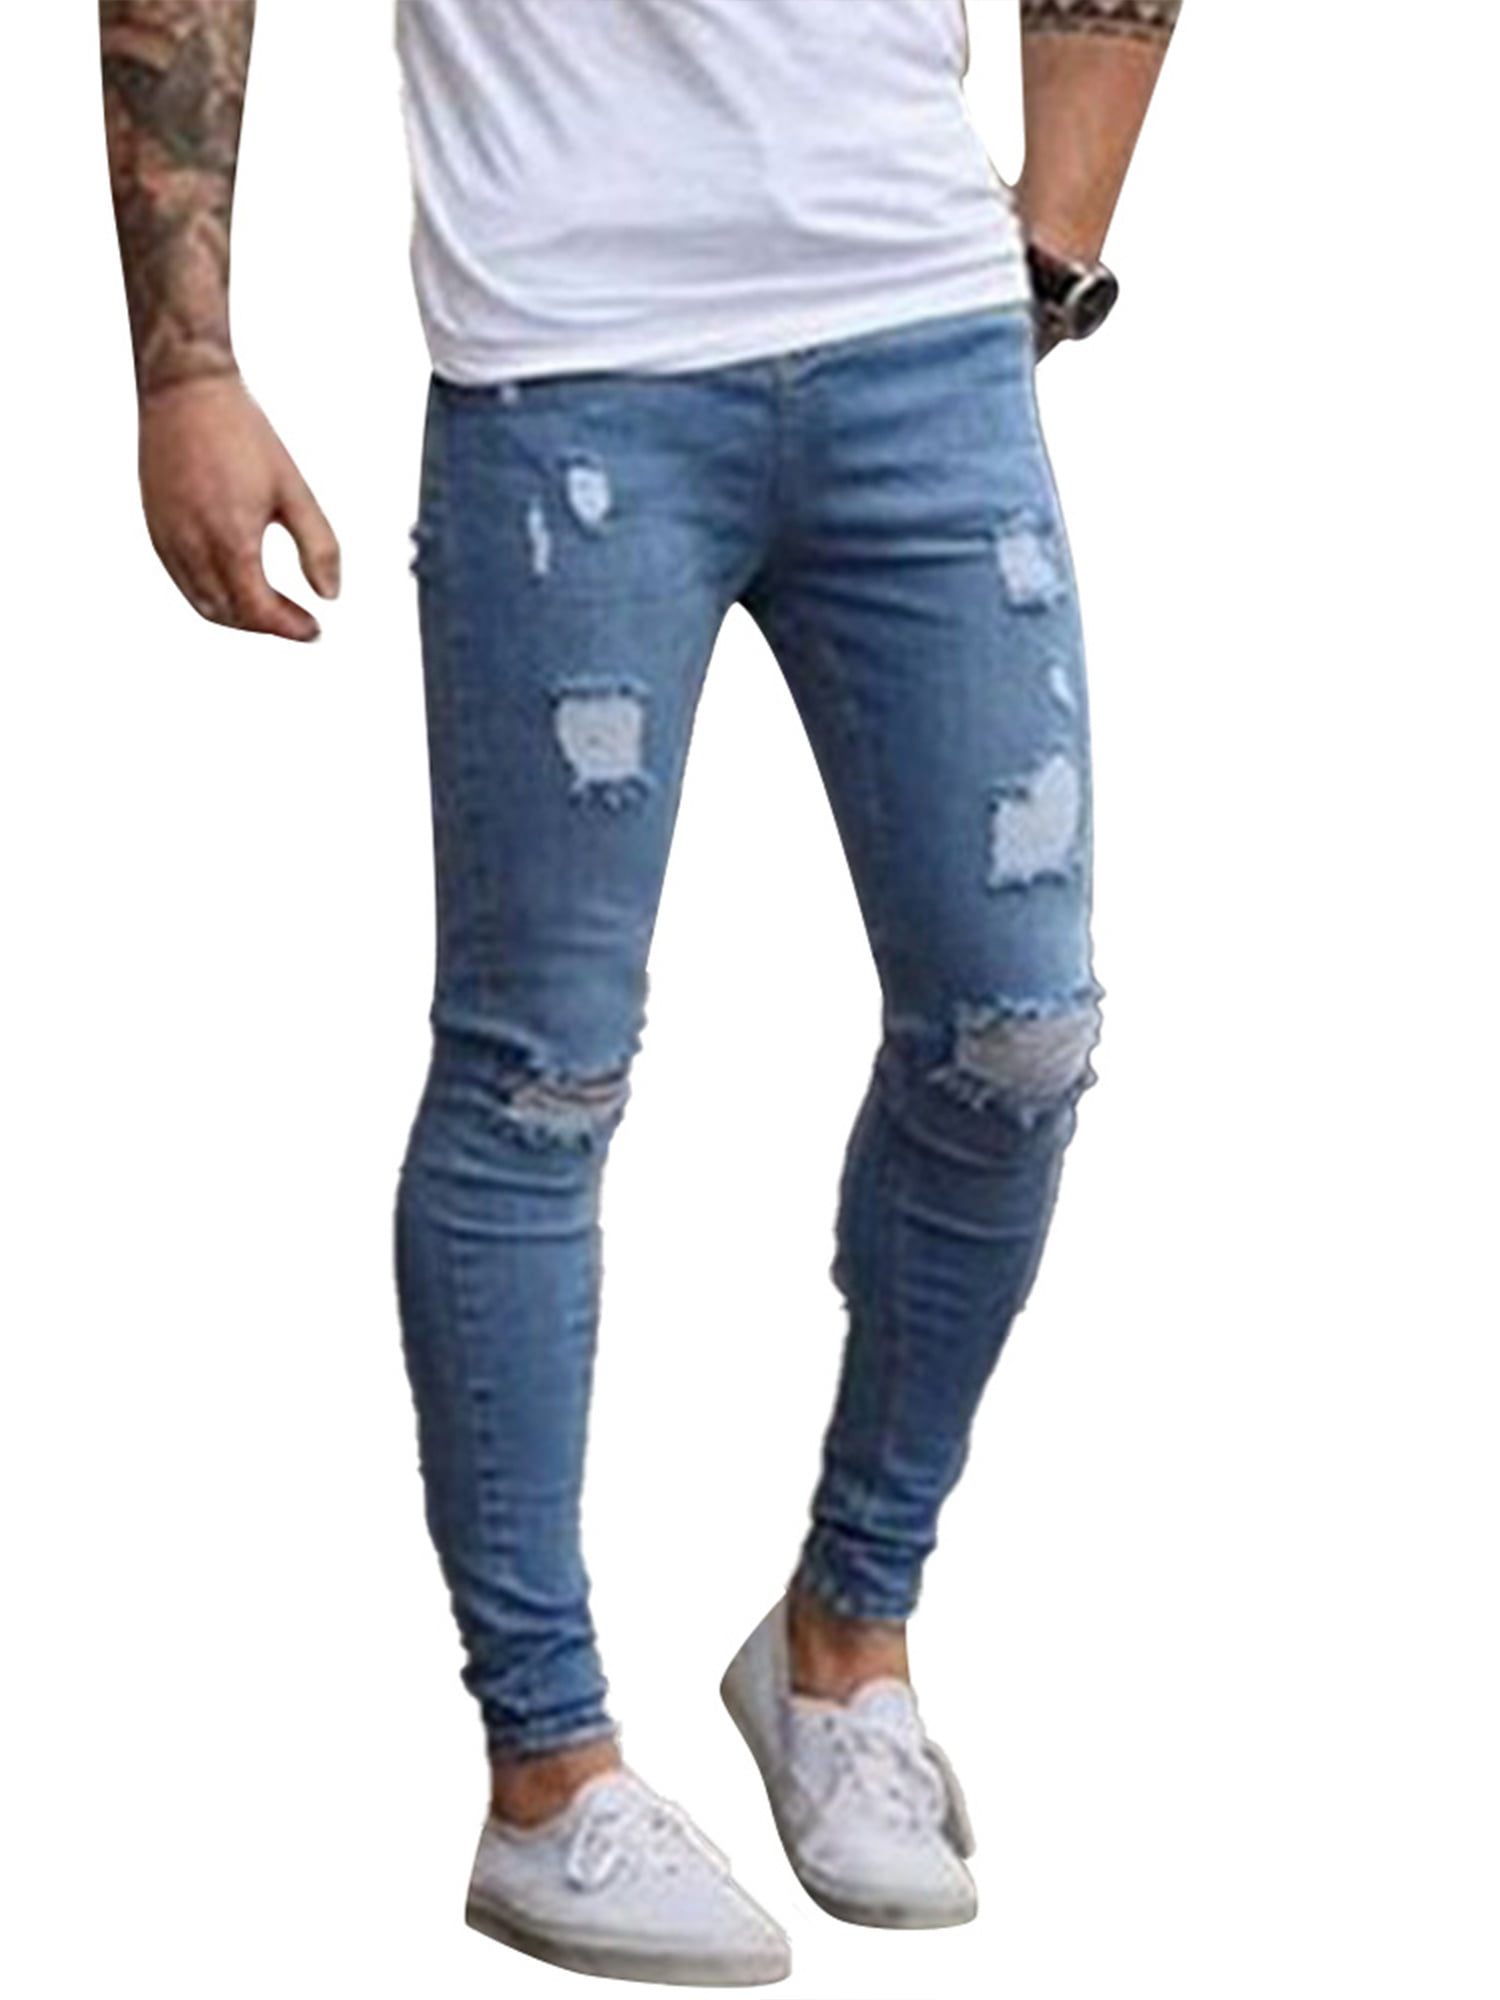 UPAIRC Men's Ripped Skinny Distressed Destroyed Slim Fit Jeans Denim Pants  Casual Trousers 